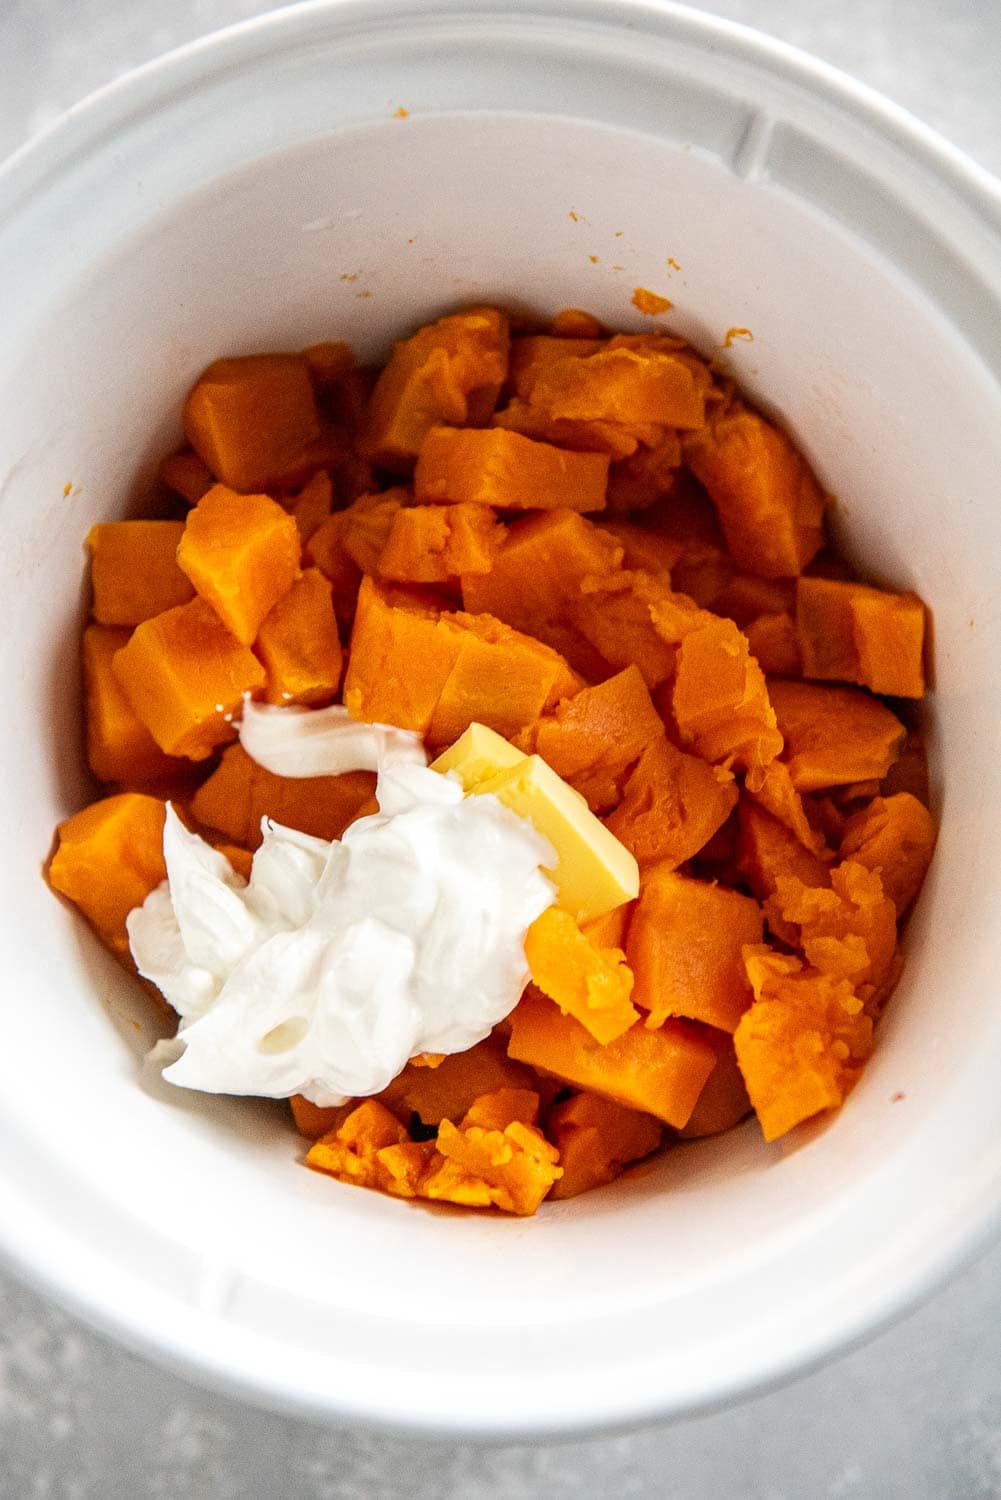 cubed sweet potatoes with butter and sour cream on top in slow cooker